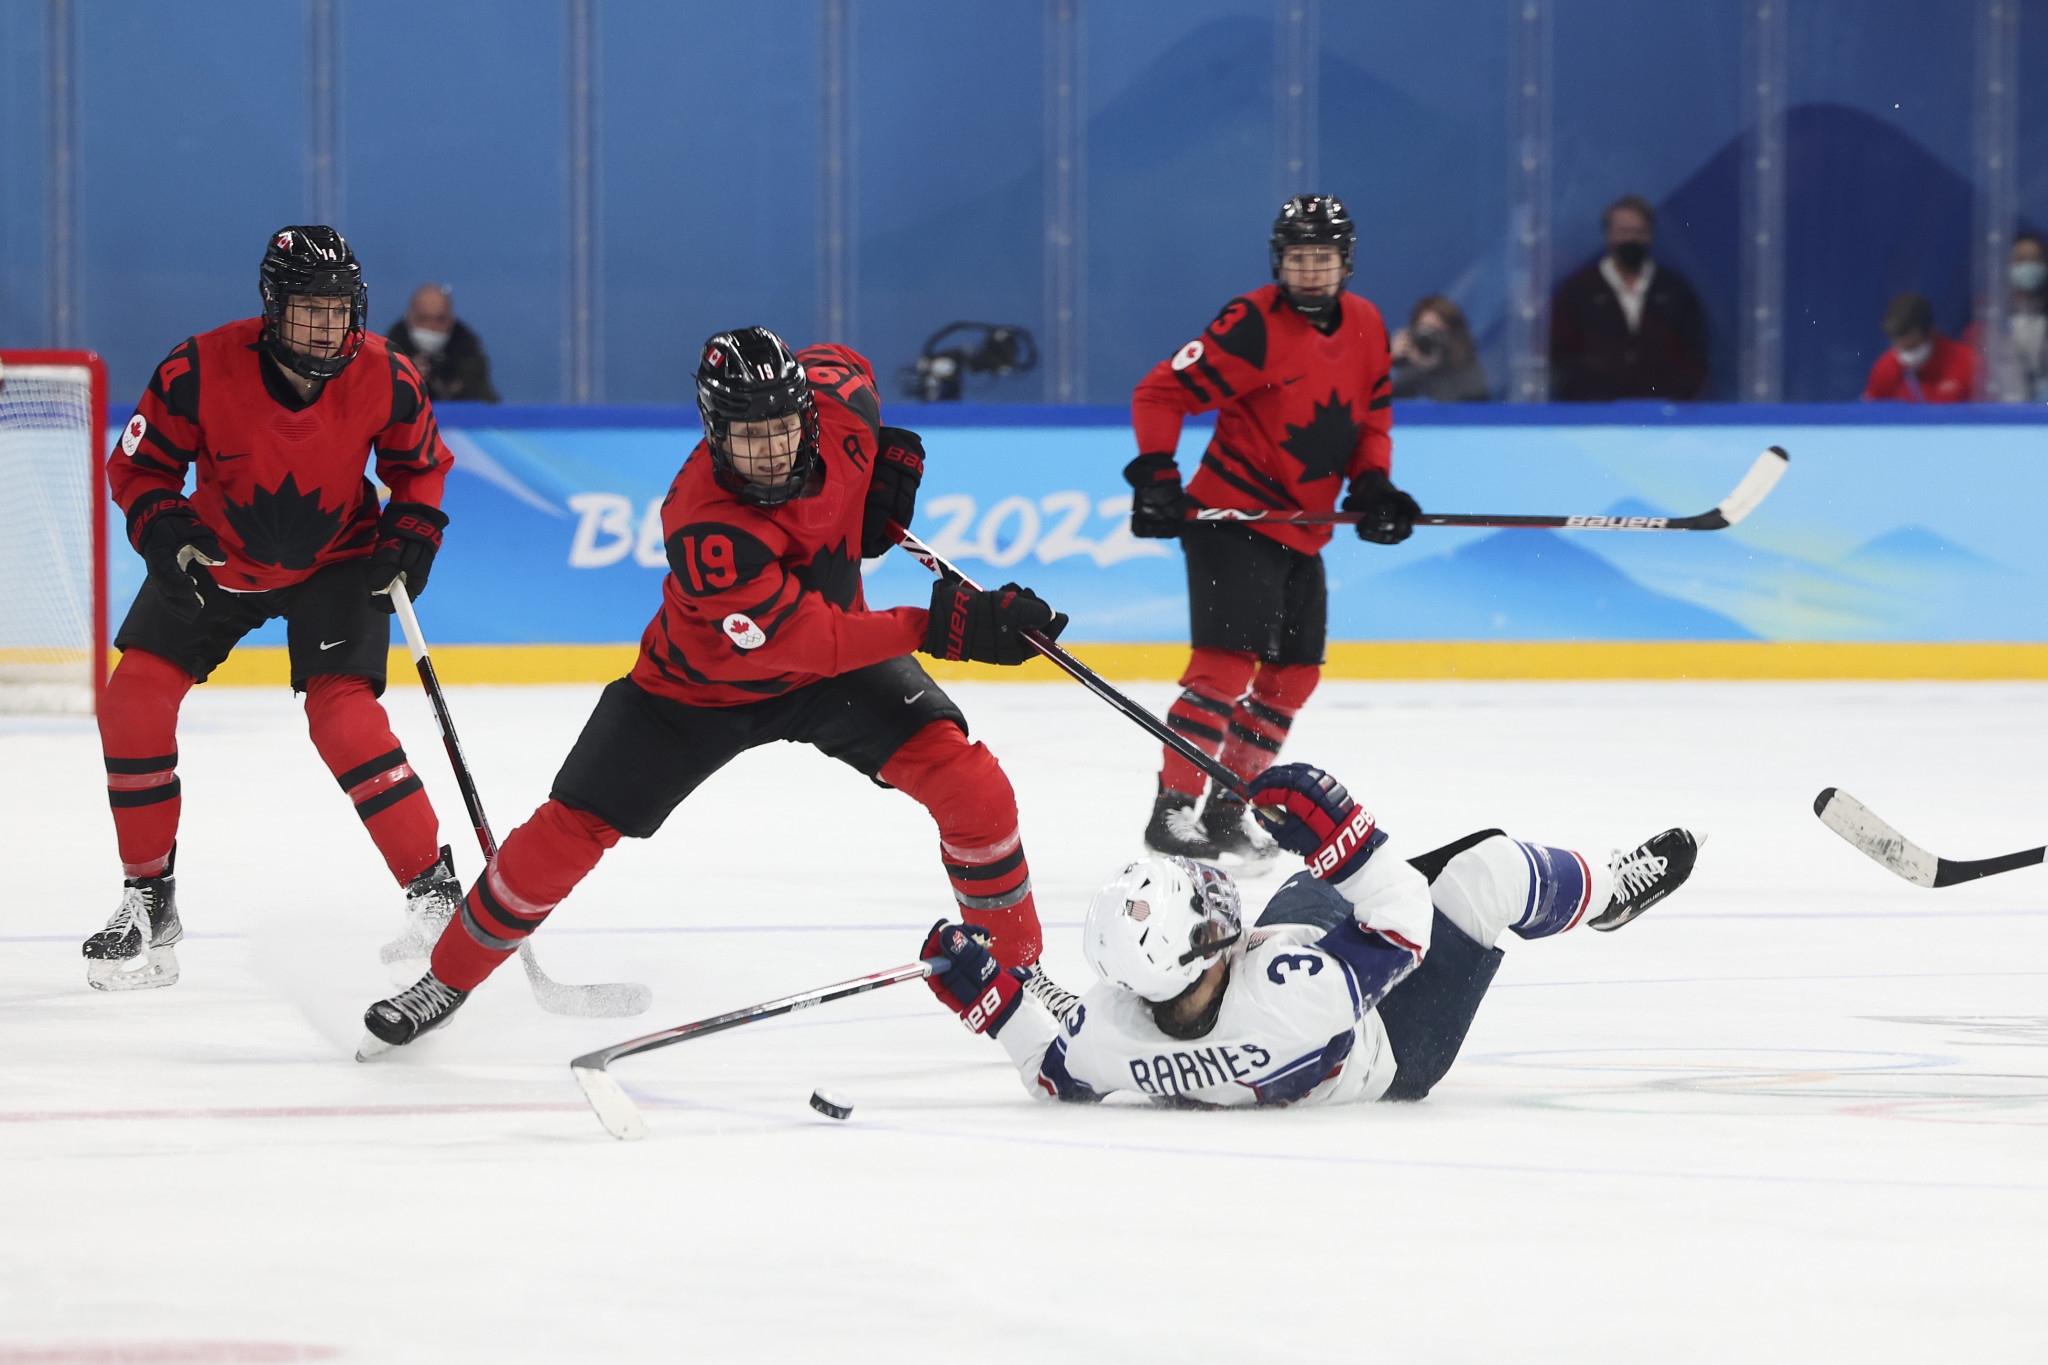 Canada's ice hockey team started well at the Women's Championship ©Getty Images